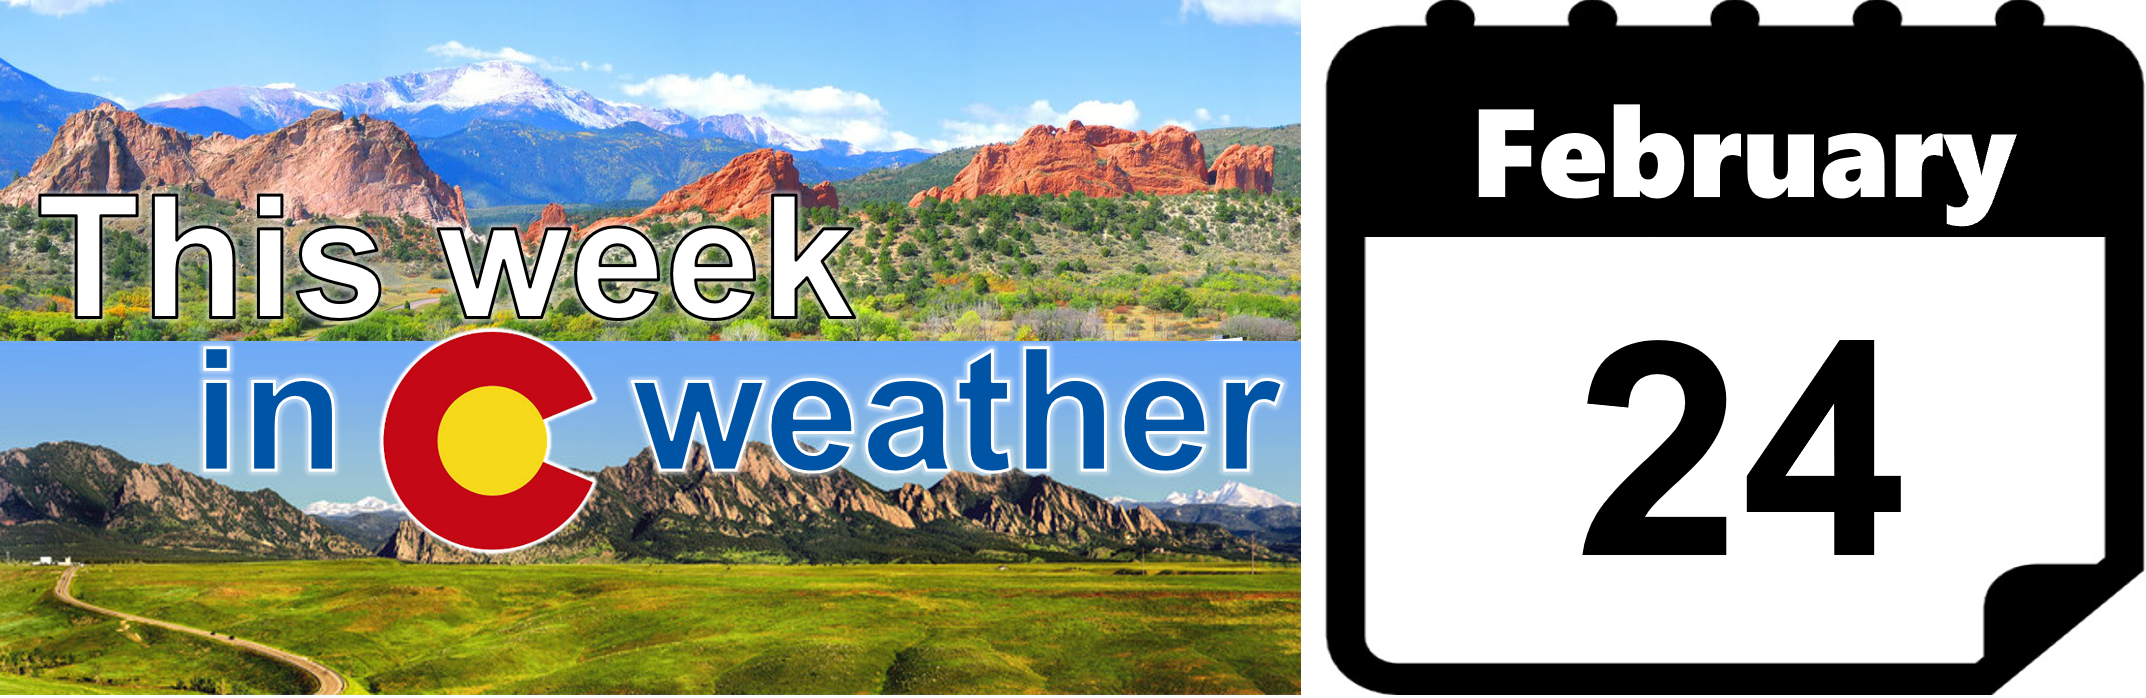 This week in Colorado weather February 24, 2020 BoulderCAST